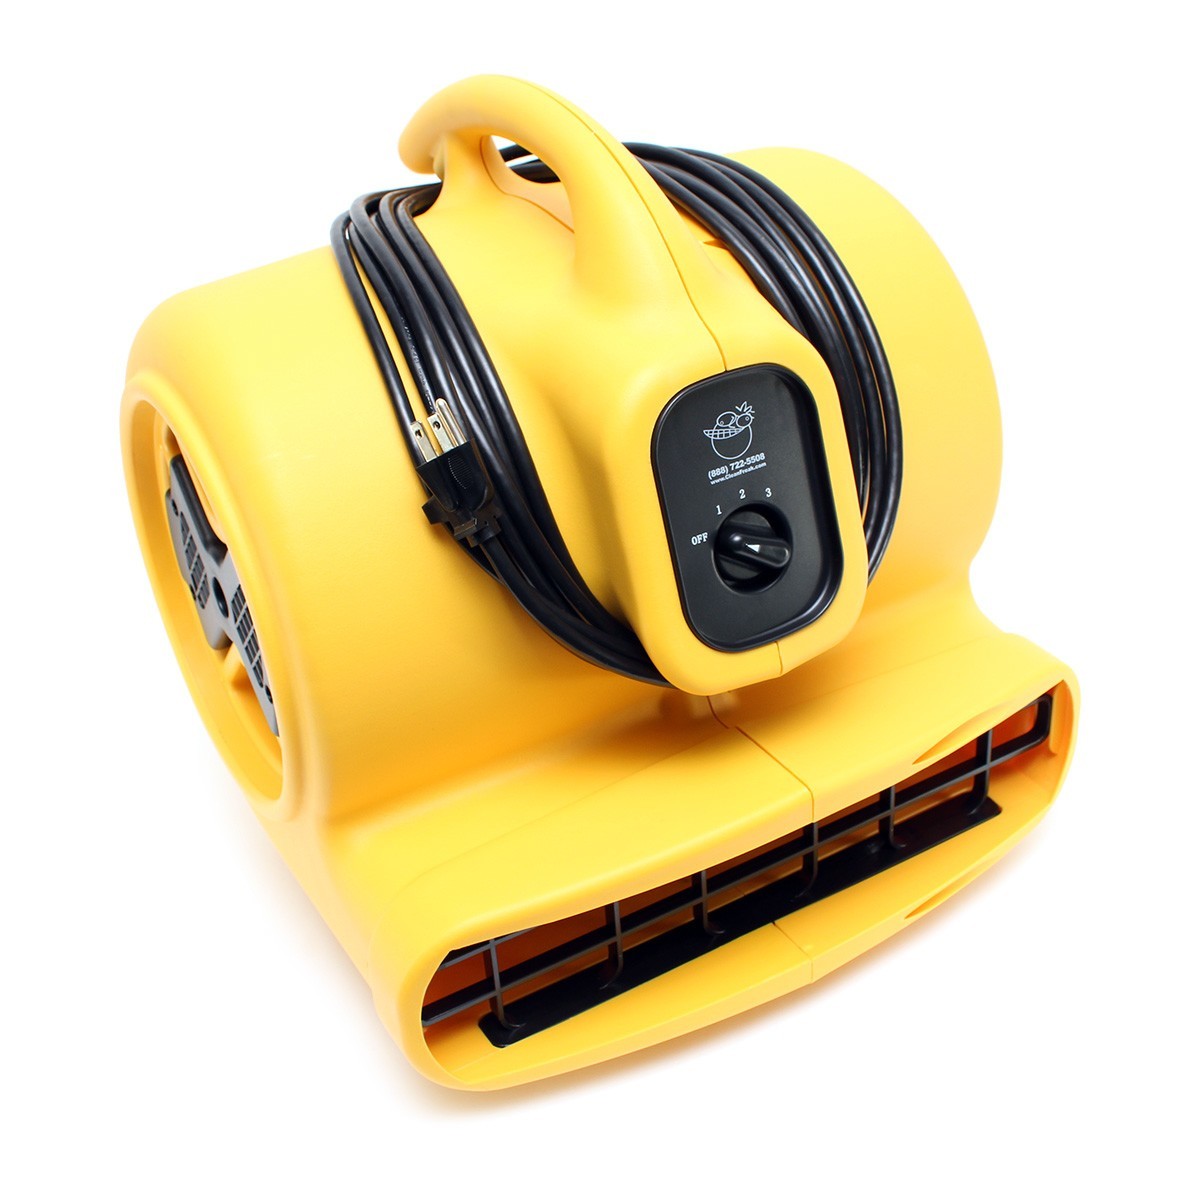 Powerful Air Mover Carpet Dryer Floor Dryer - GCUPS Limited